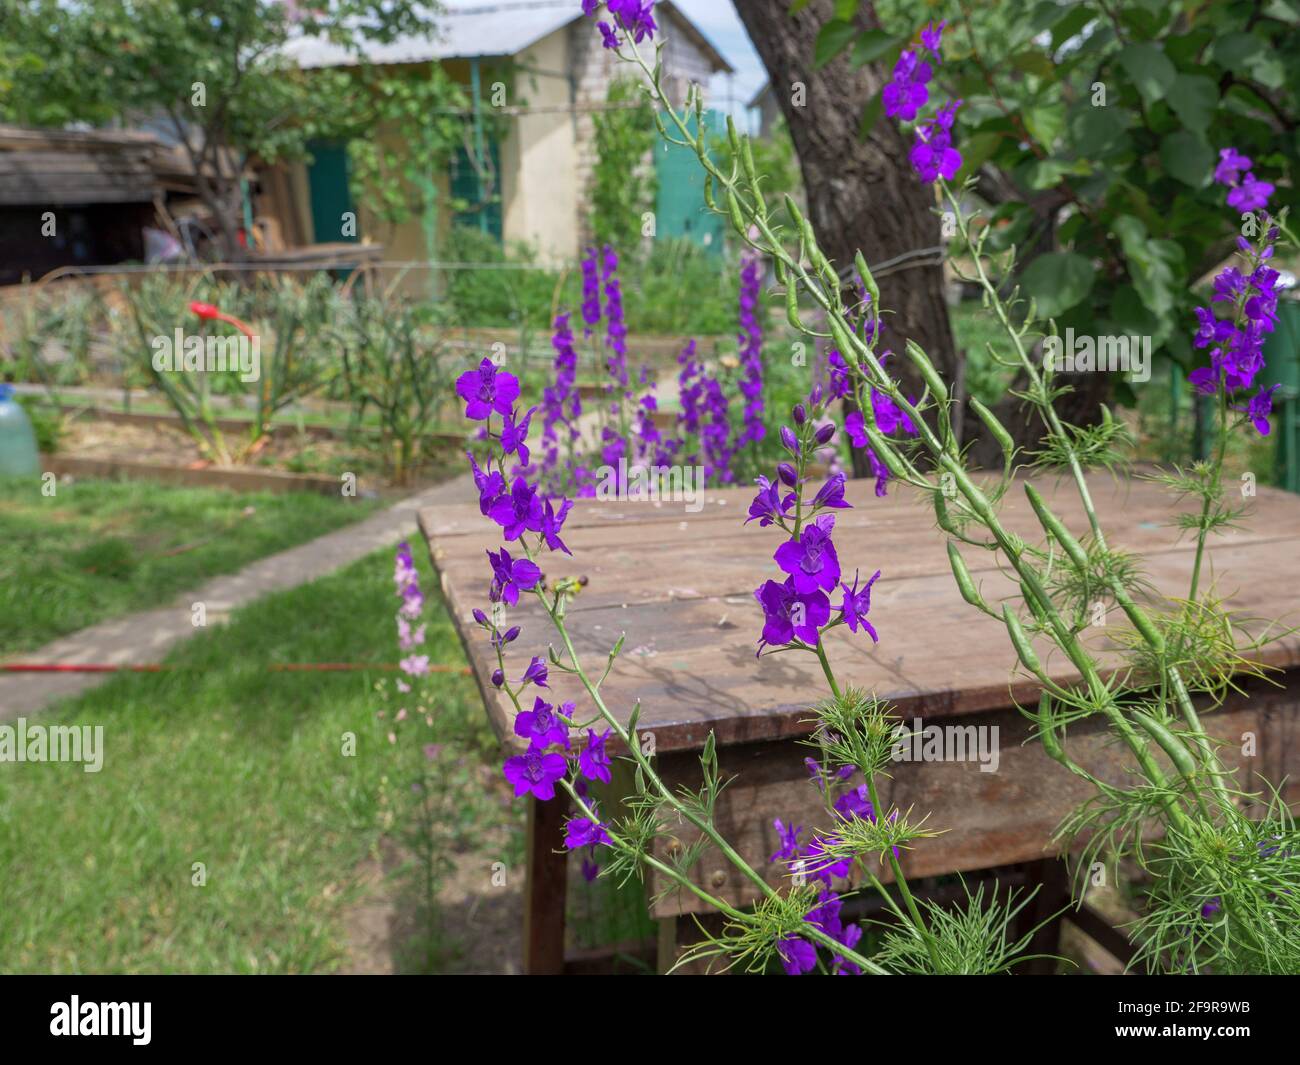 Beautiful purple Delphinium Consolida (Consolida regalis) flowers blooming near the rough rustic wooden table in a country house garden. Stock Photo